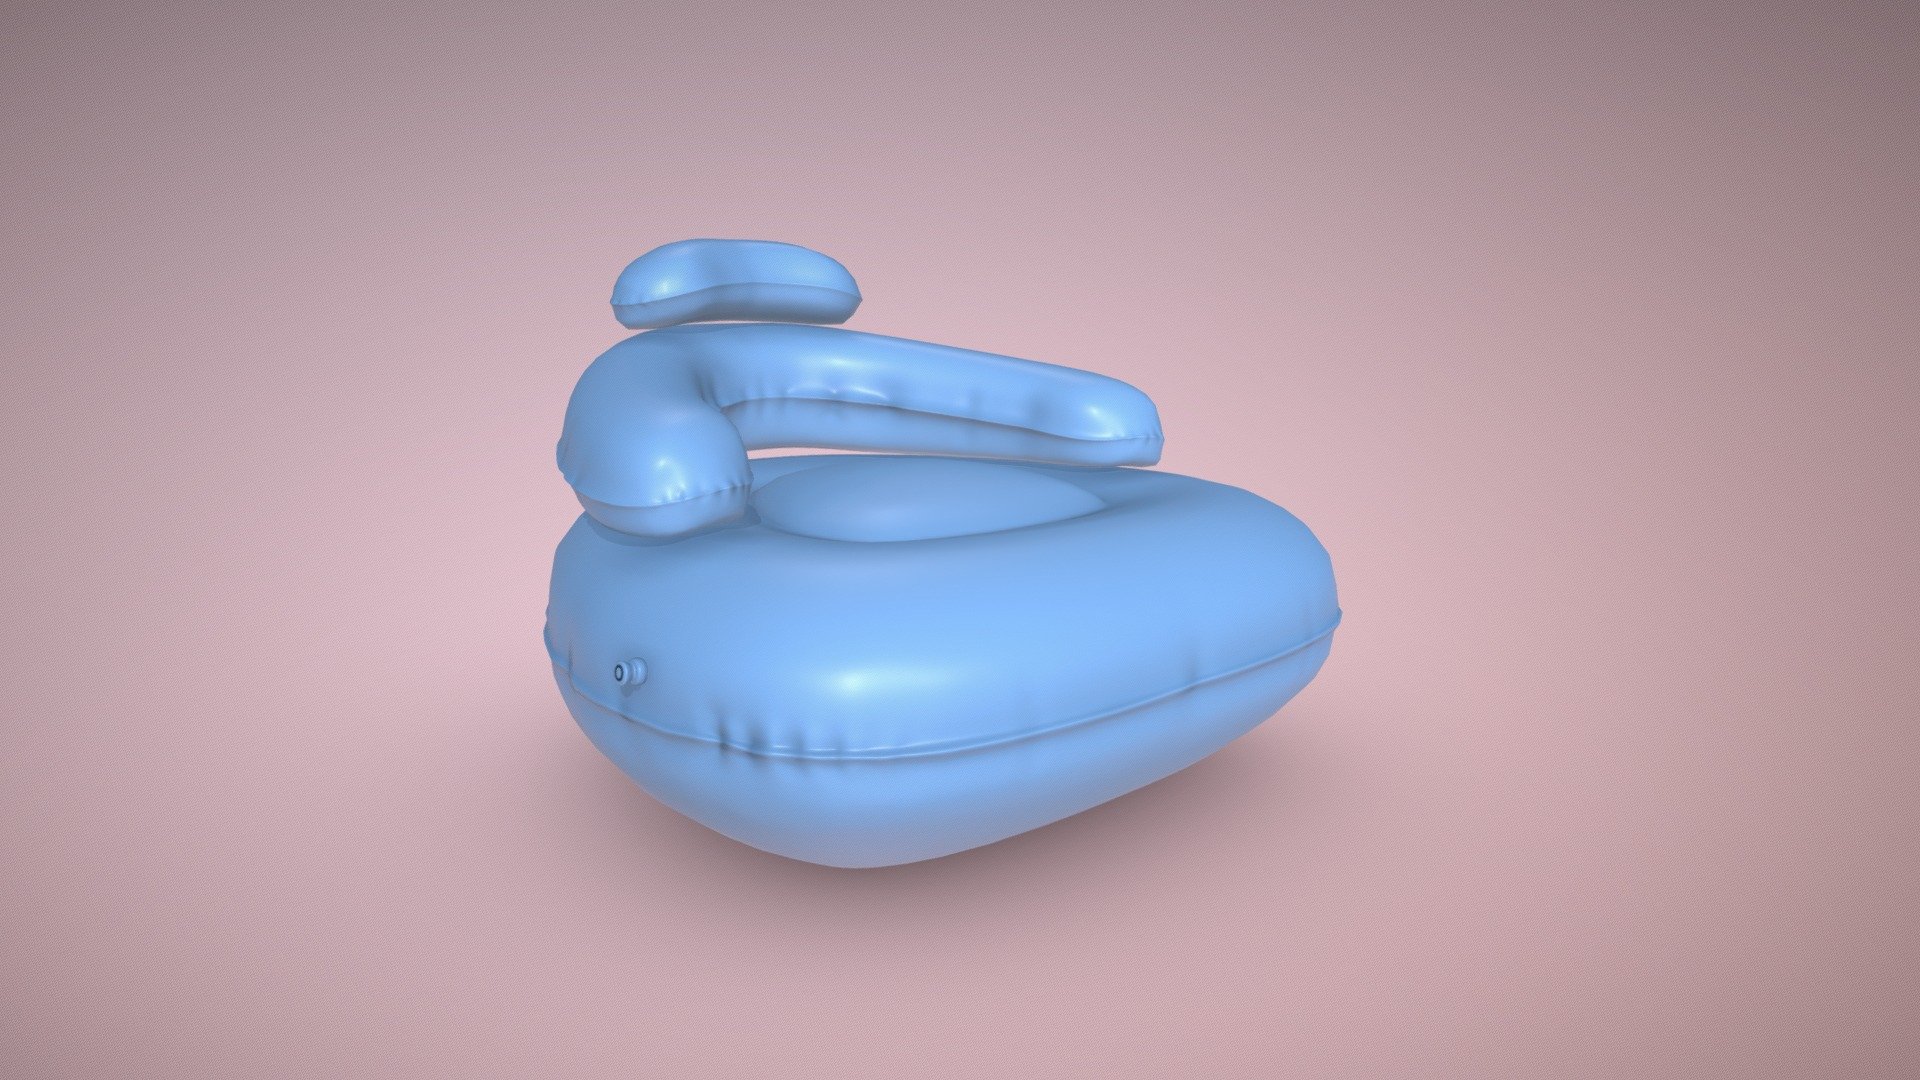 Inflatable armchair. Light blue rubber. 

I made that inflatable armchair in Blender and Substance Painter 3d model